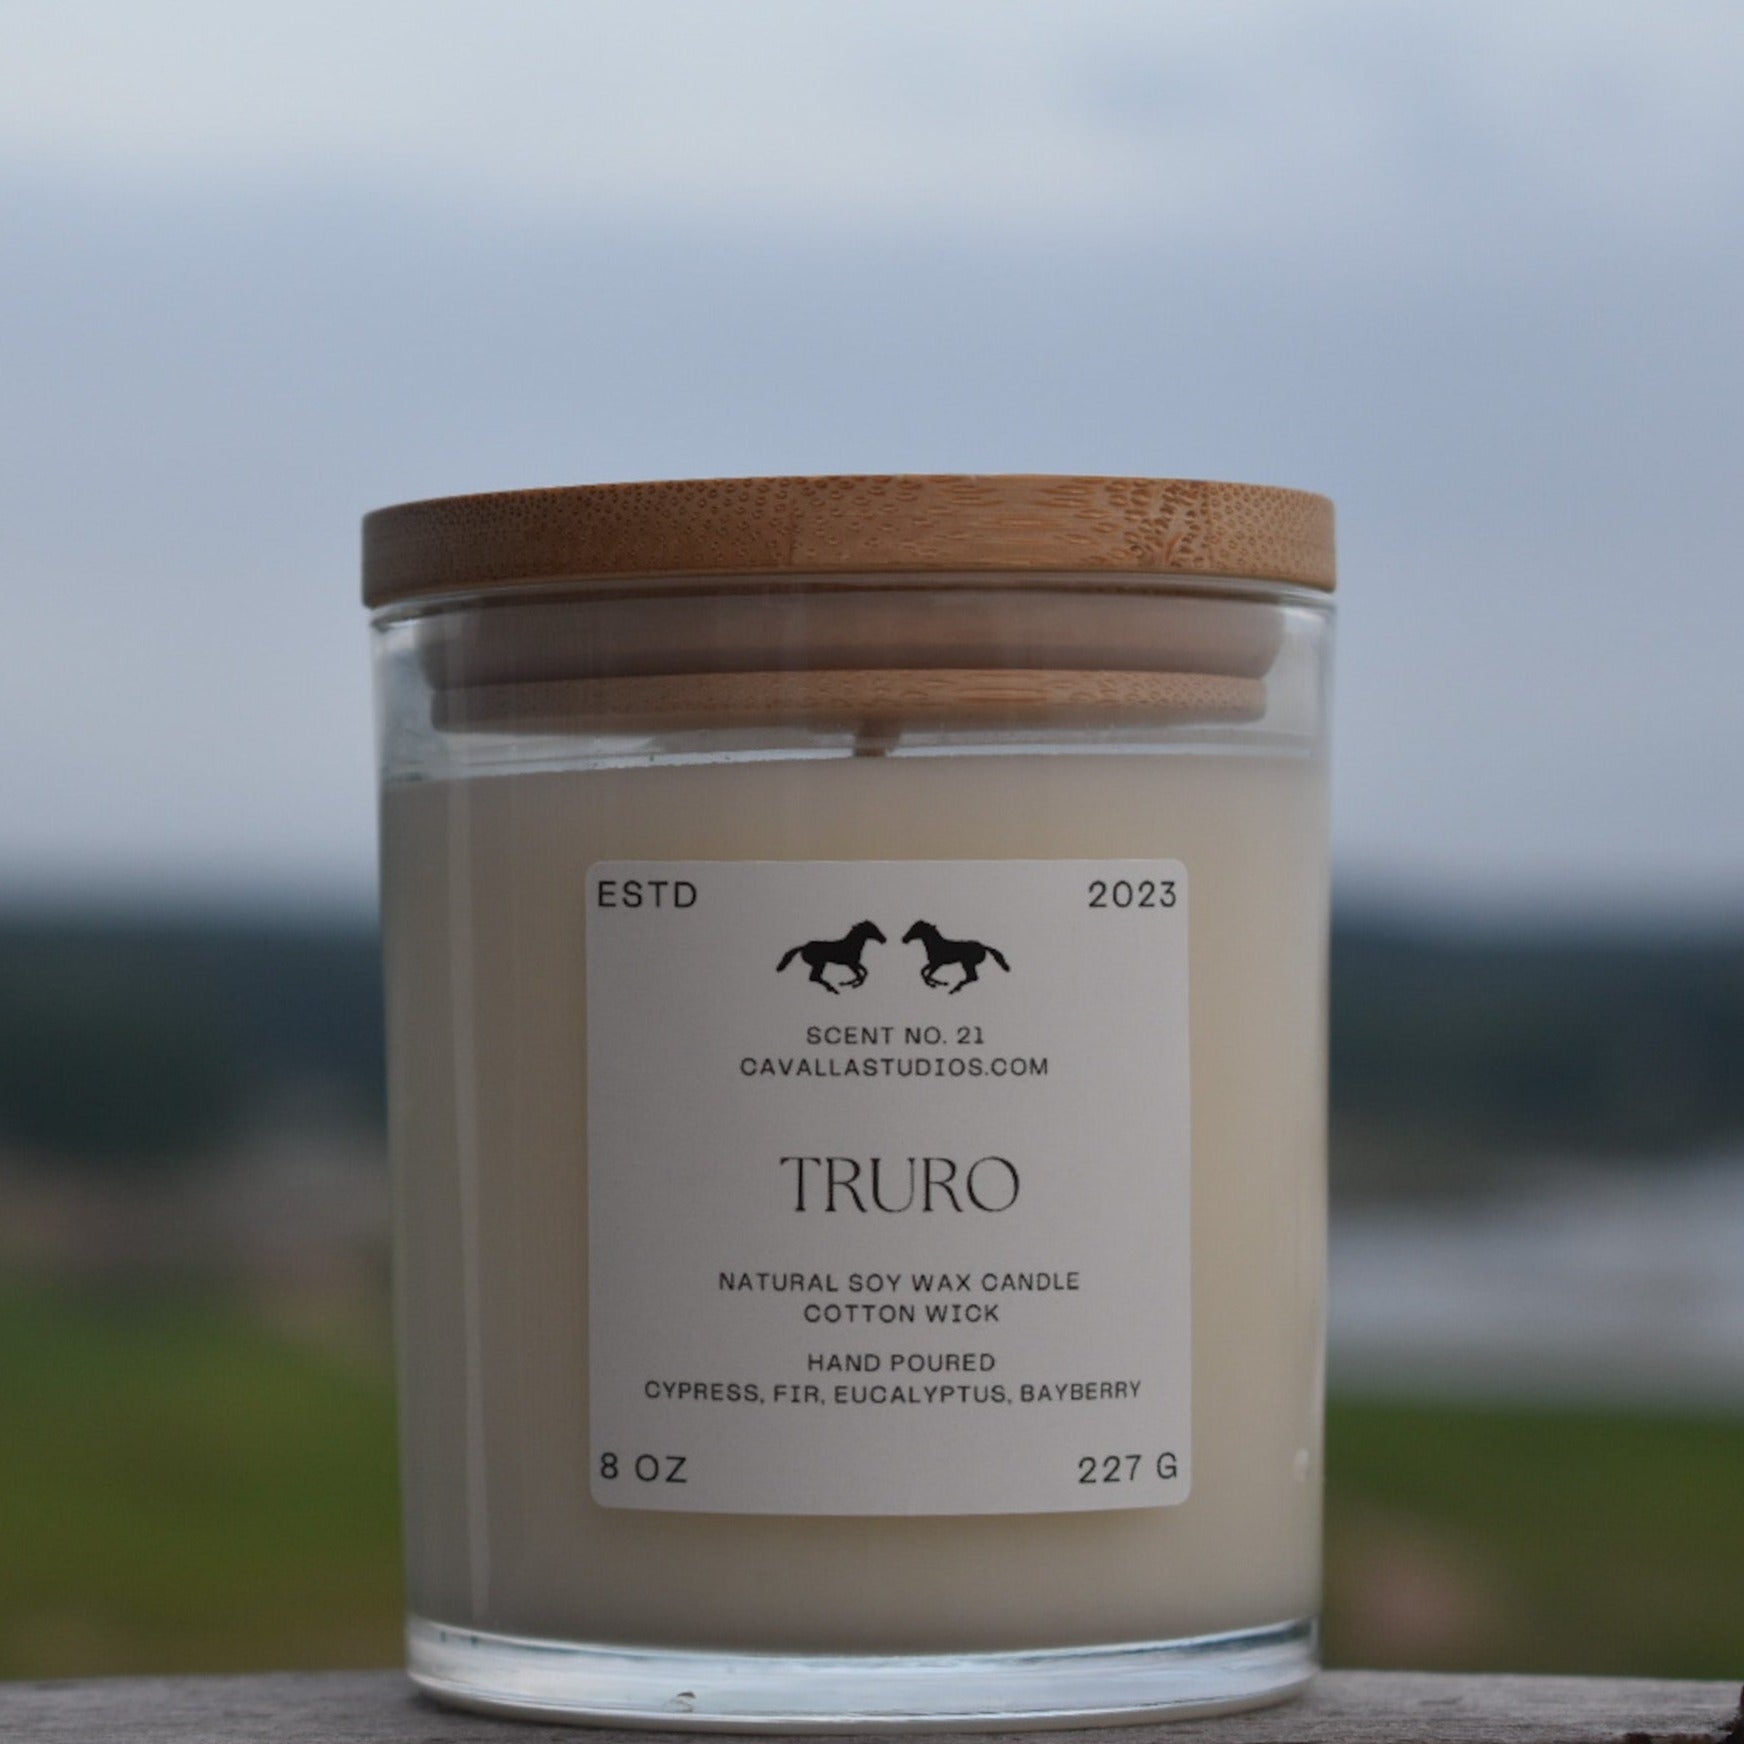 Classic white candle in a clear glass vessel covered by a bamboo lid. The glass features the 'Cavalla Studios' logo and the candle is labeled with the scent name 'Truro.' The blurred background is Pamet River.